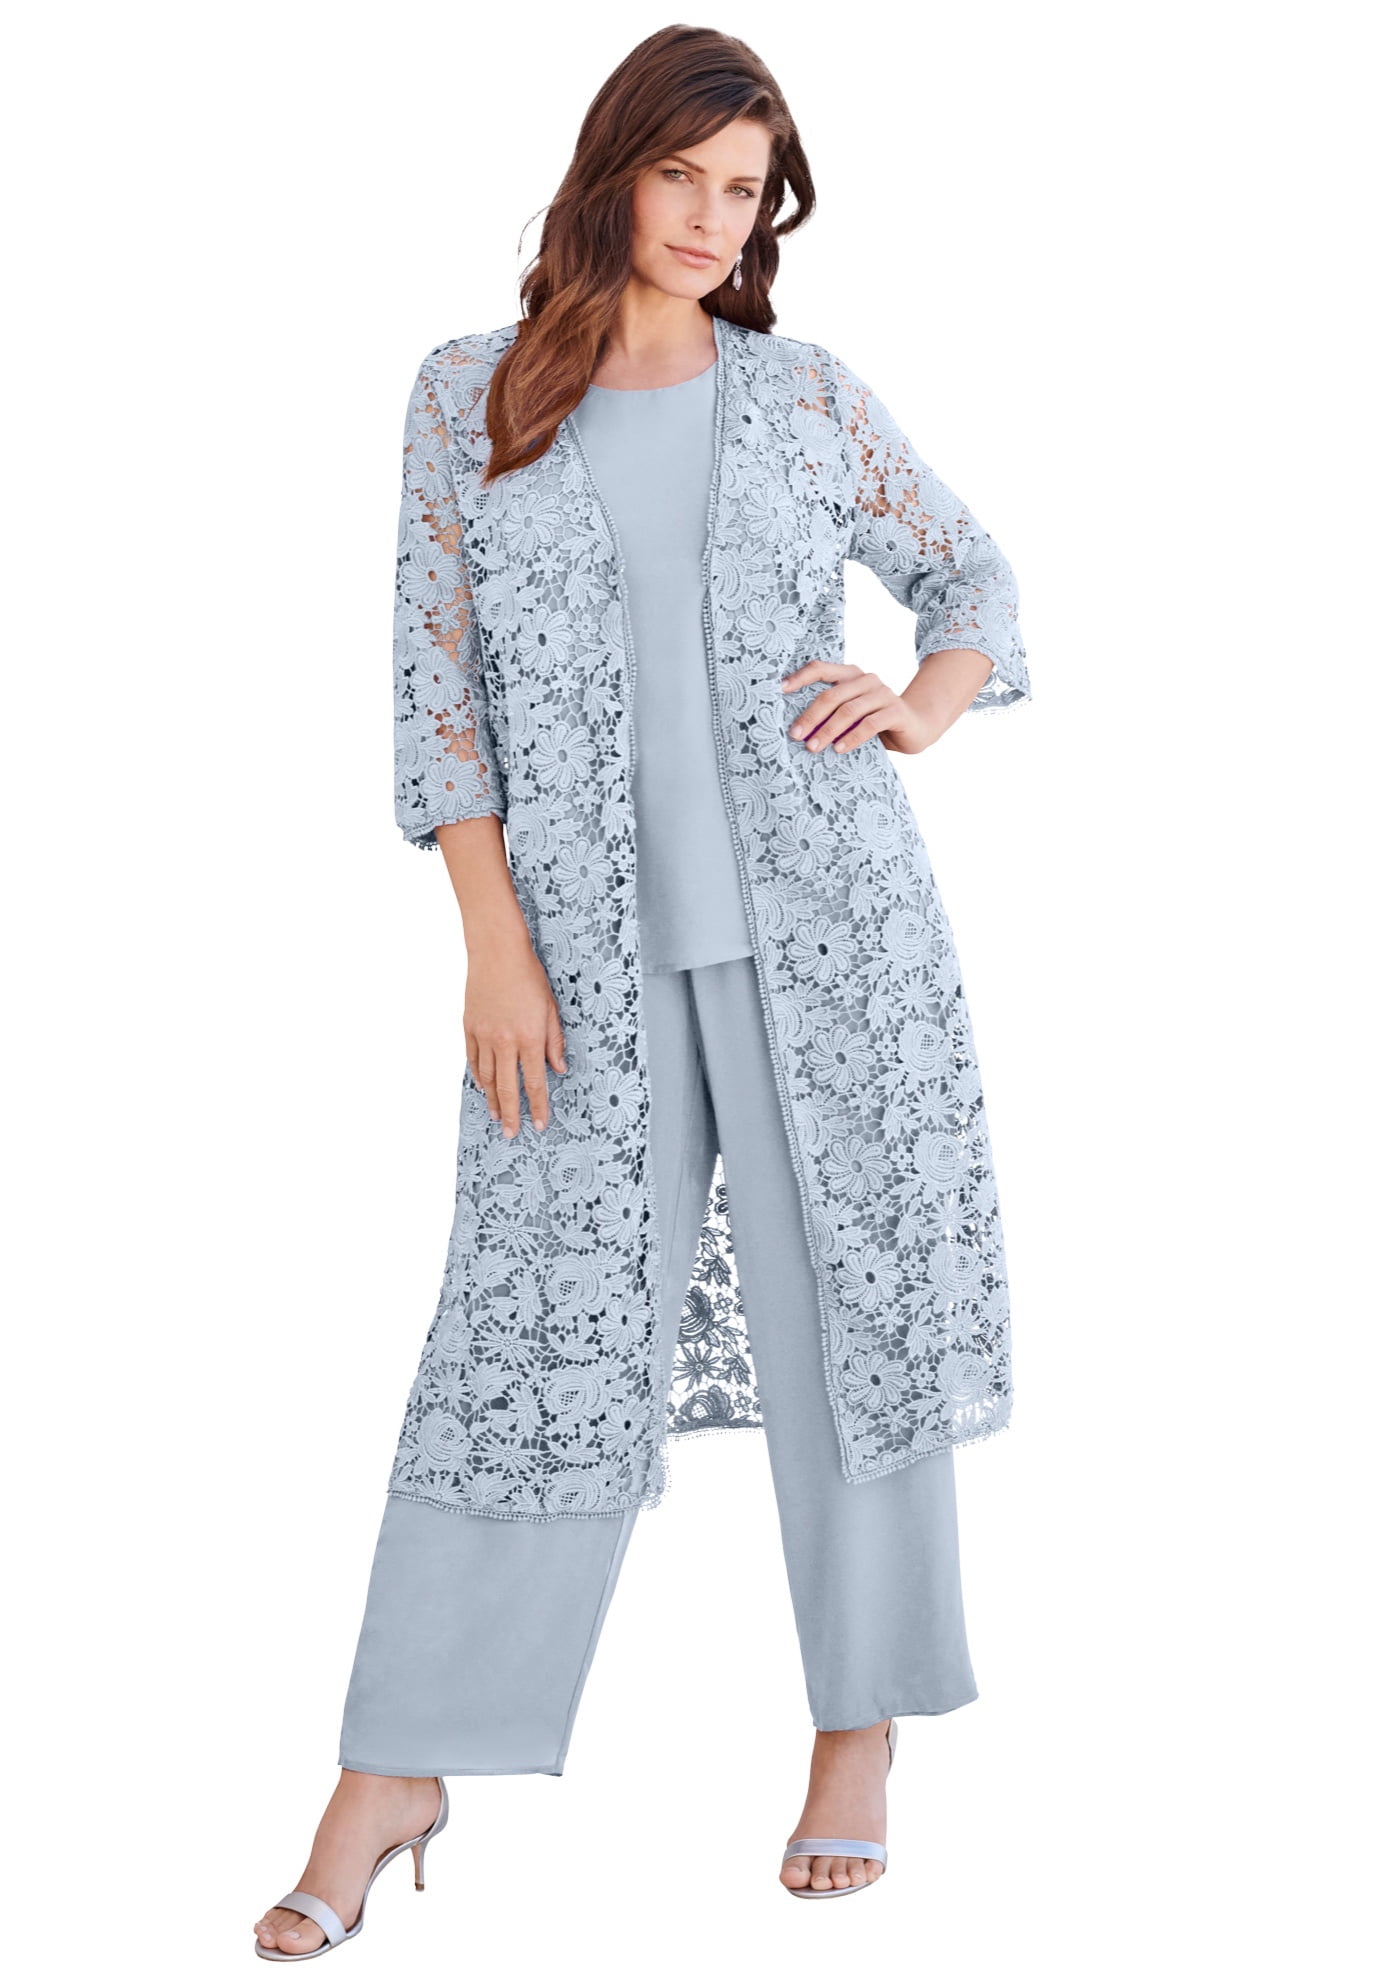 Roaman's Women's Plus Size Three-Piece Lace Duster & Pant Suit Formal  Evening Wear Set, Mother Of The Bride Outfit